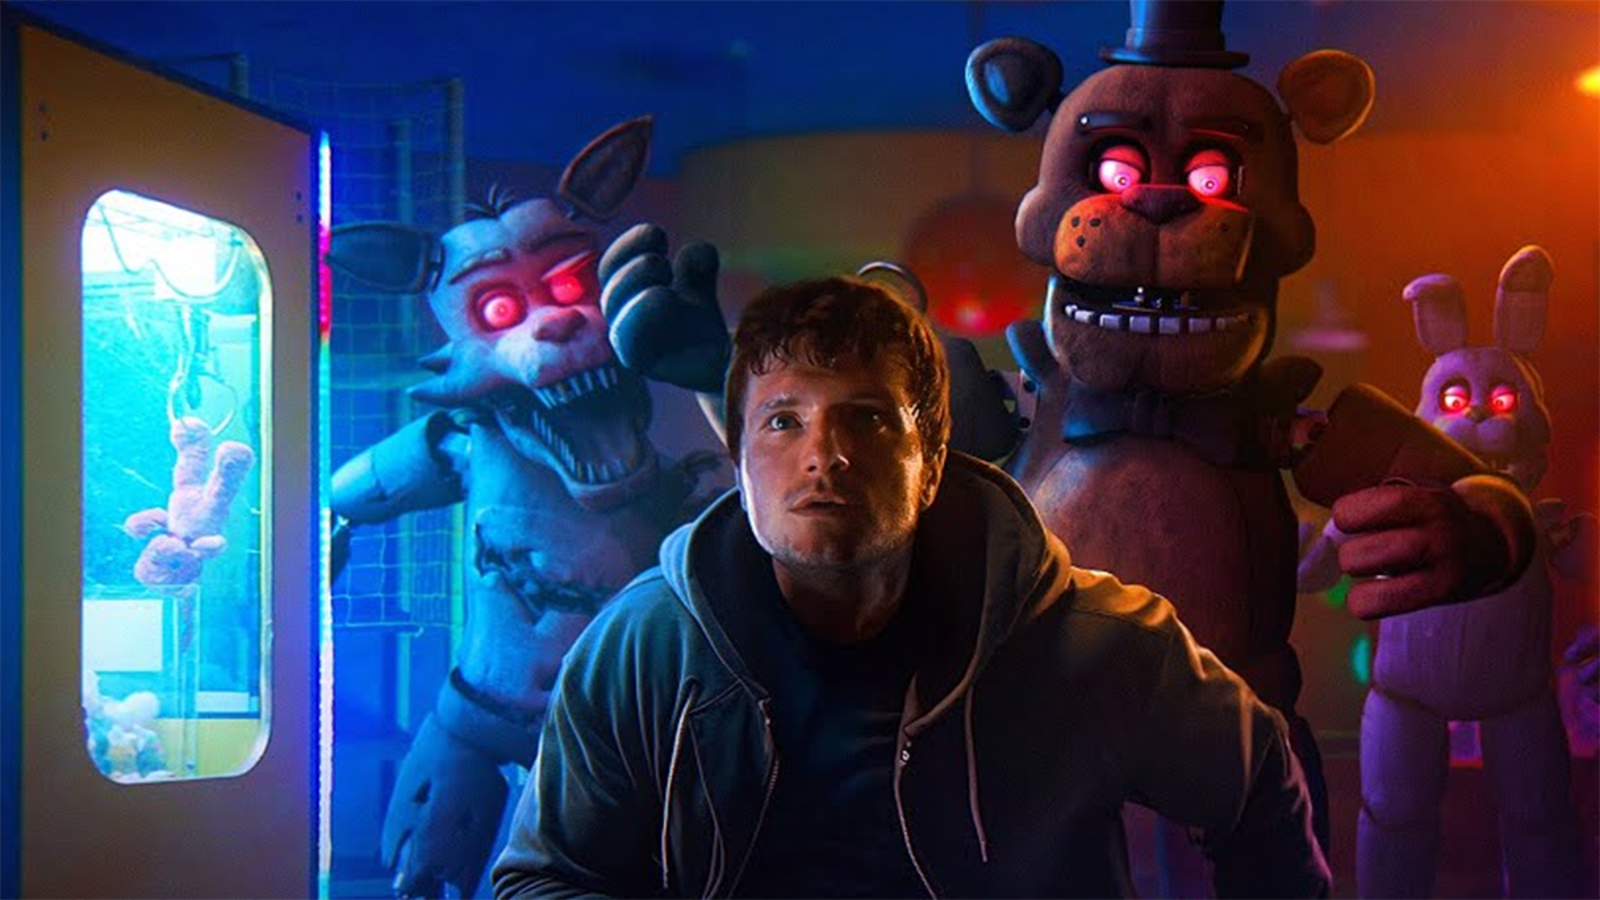 FNAF Movie Updates on X: Happy New Year! Here's a first look at